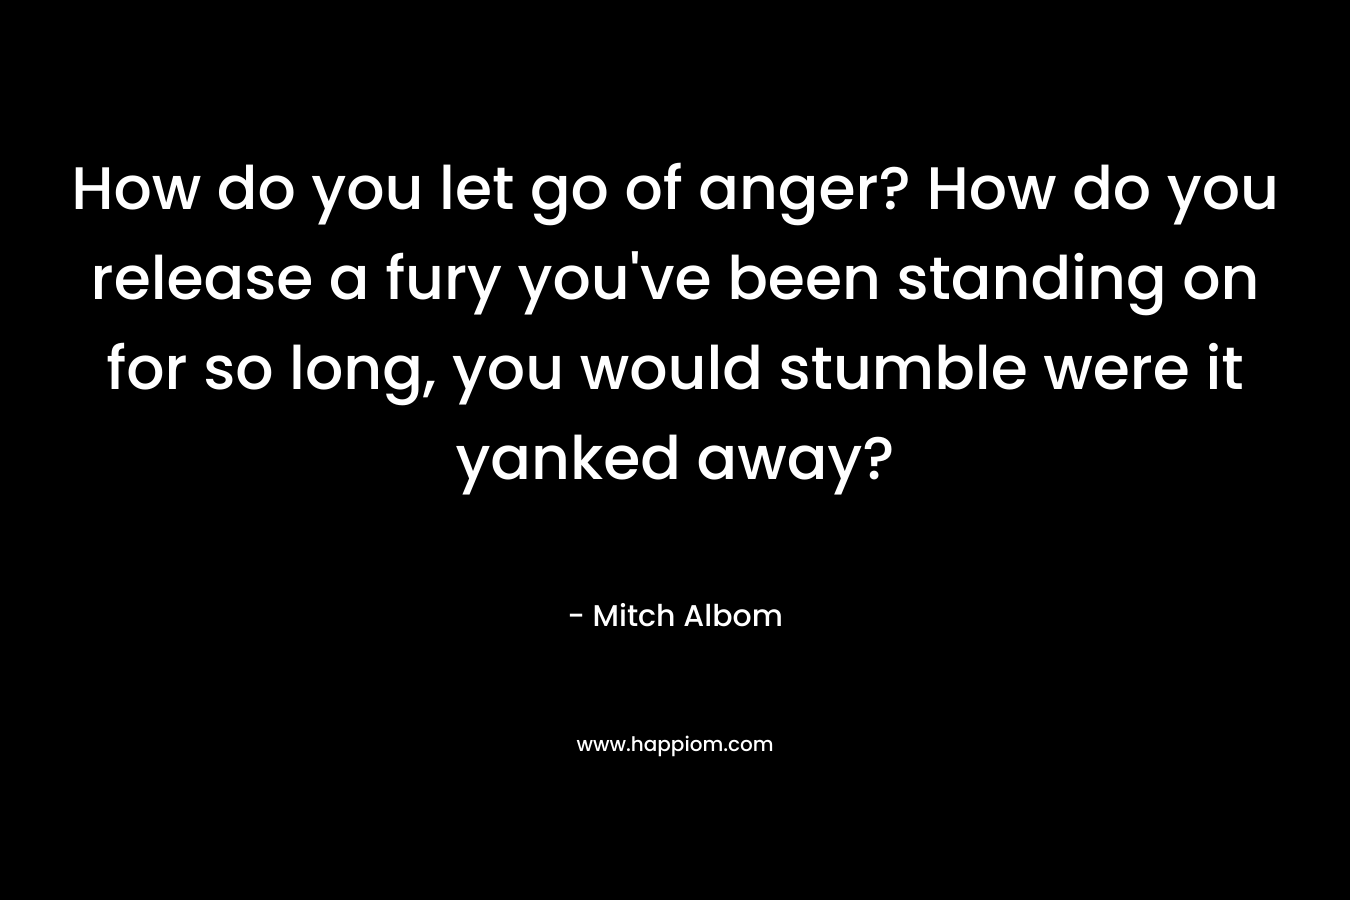 How do you let go of anger? How do you release a fury you’ve been standing on for so long, you would stumble were it yanked away? – Mitch Albom